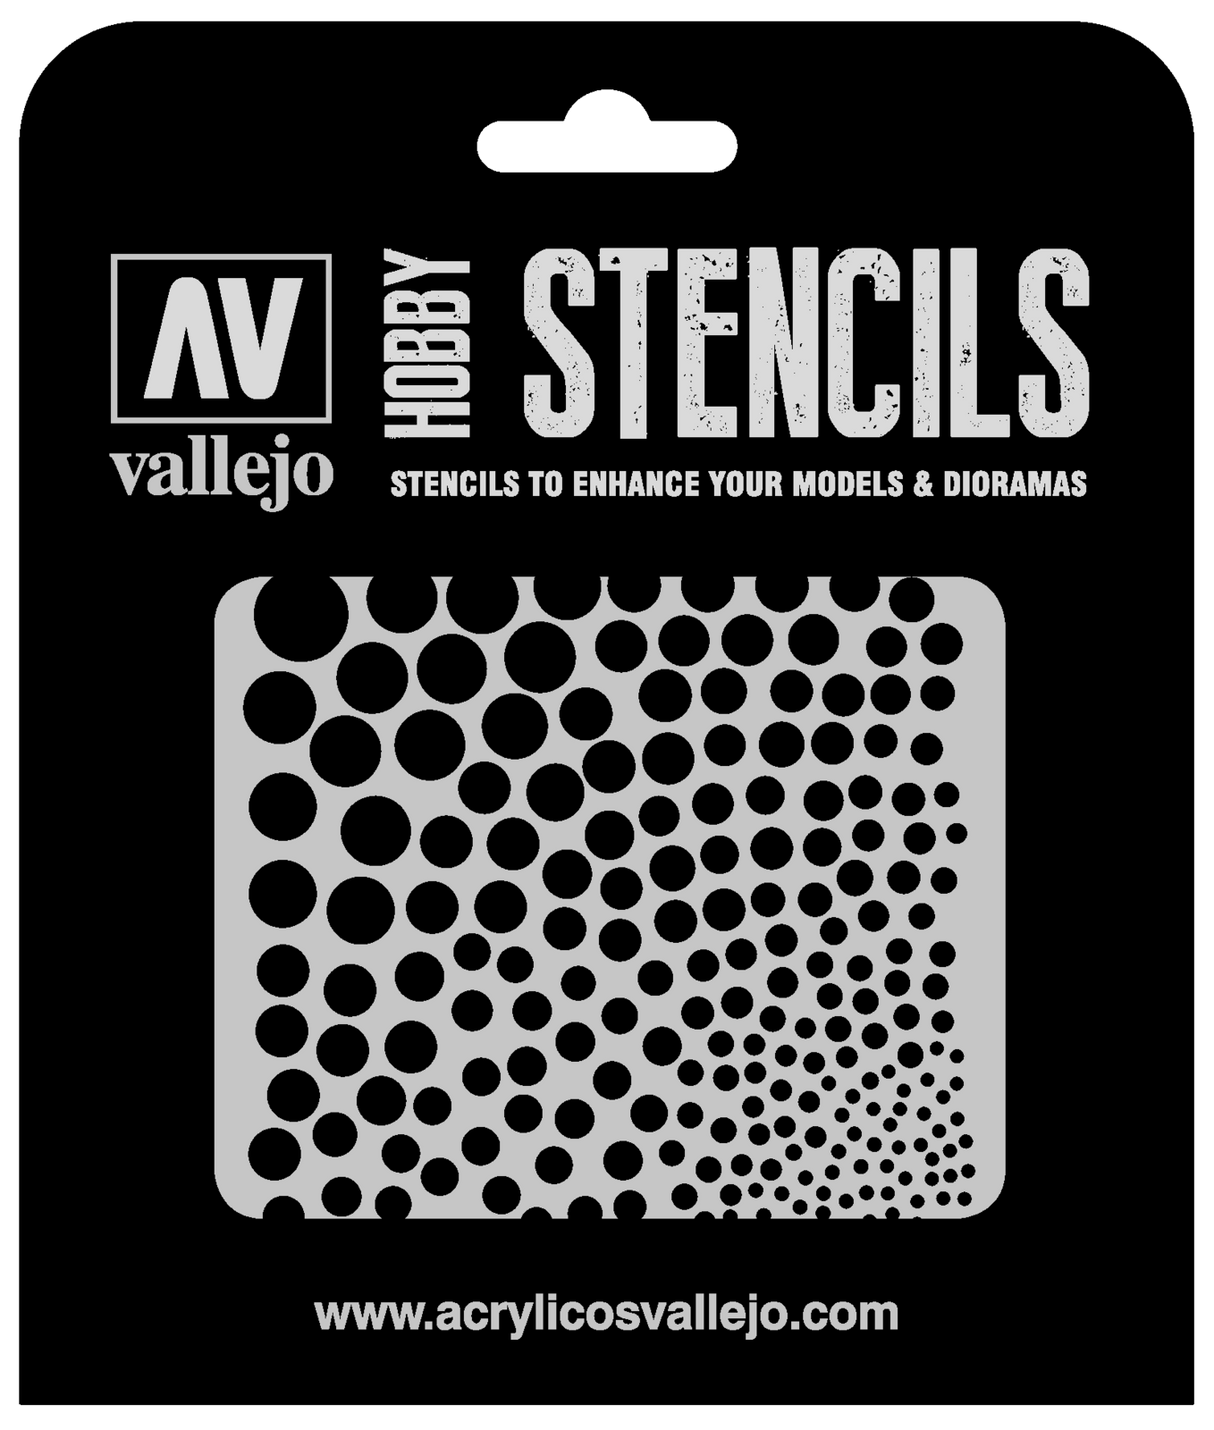 Vallejo ST-SF002 Circle Textures Stencil Vallejo PAINT, BRUSHES & SUPPLIES